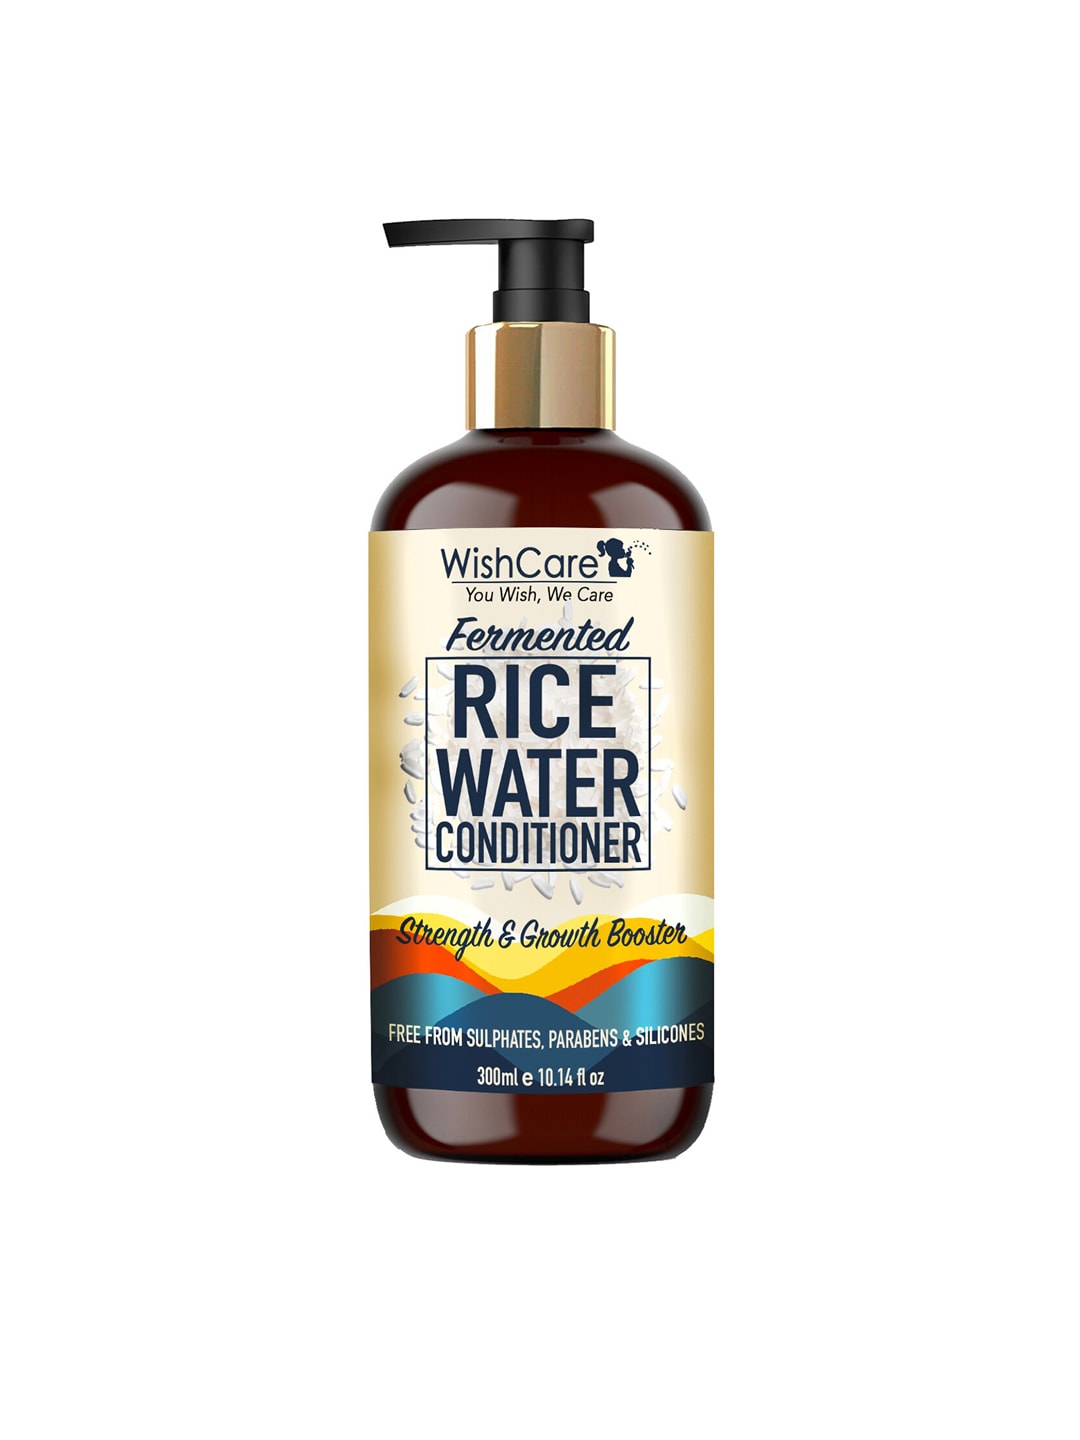 WishCare Fermented Rice Water Conditioner - Strength & Growth Formula 300 g Price in India